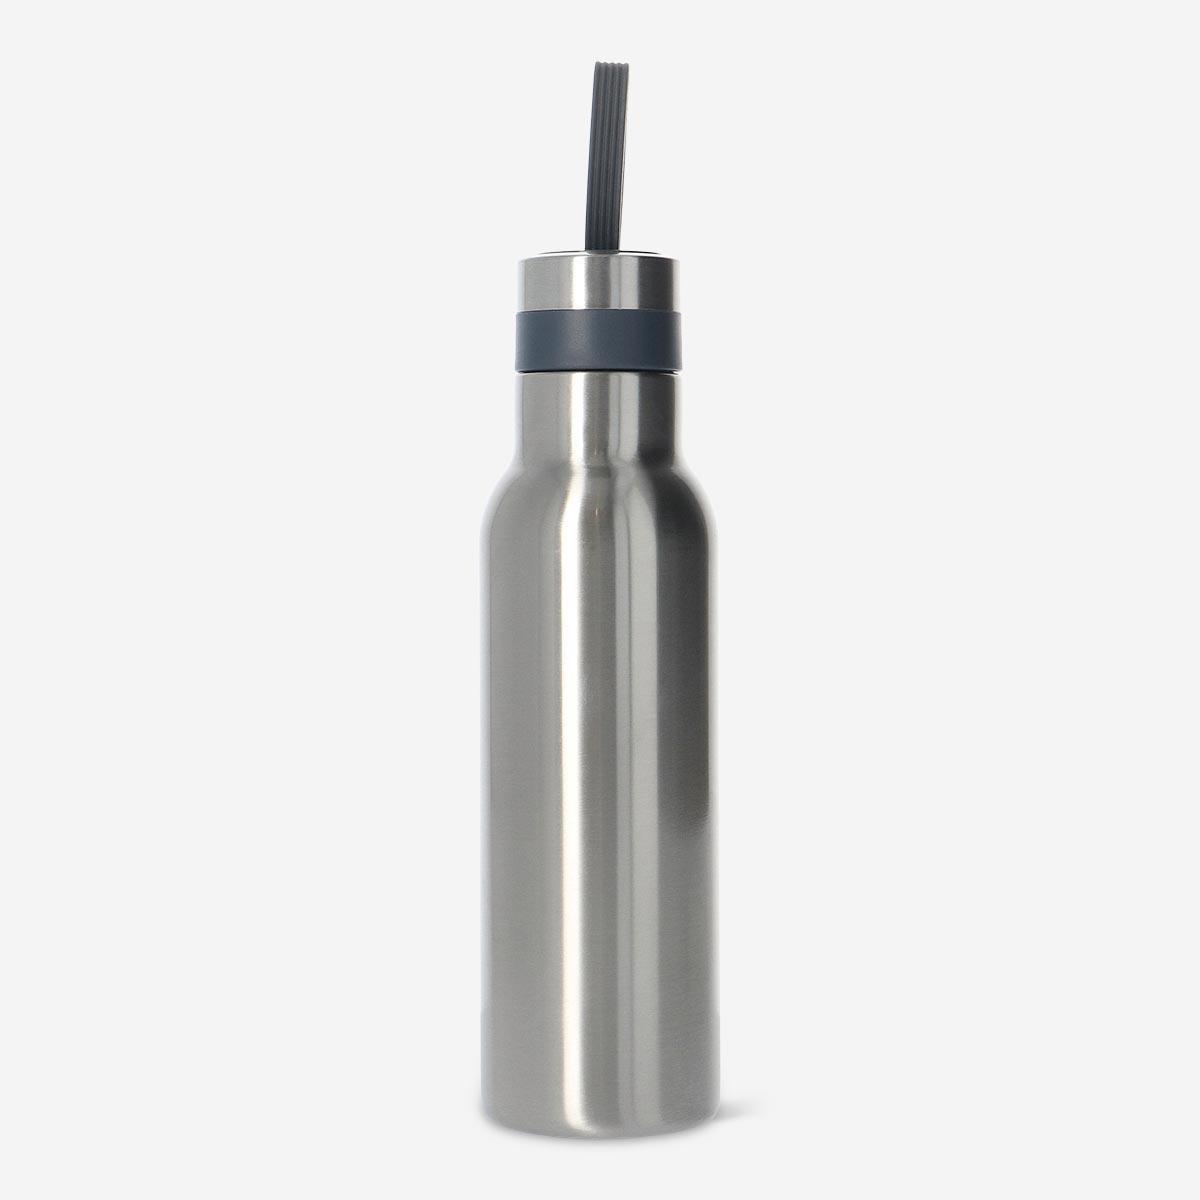 Steel thermo flask. 500 ml